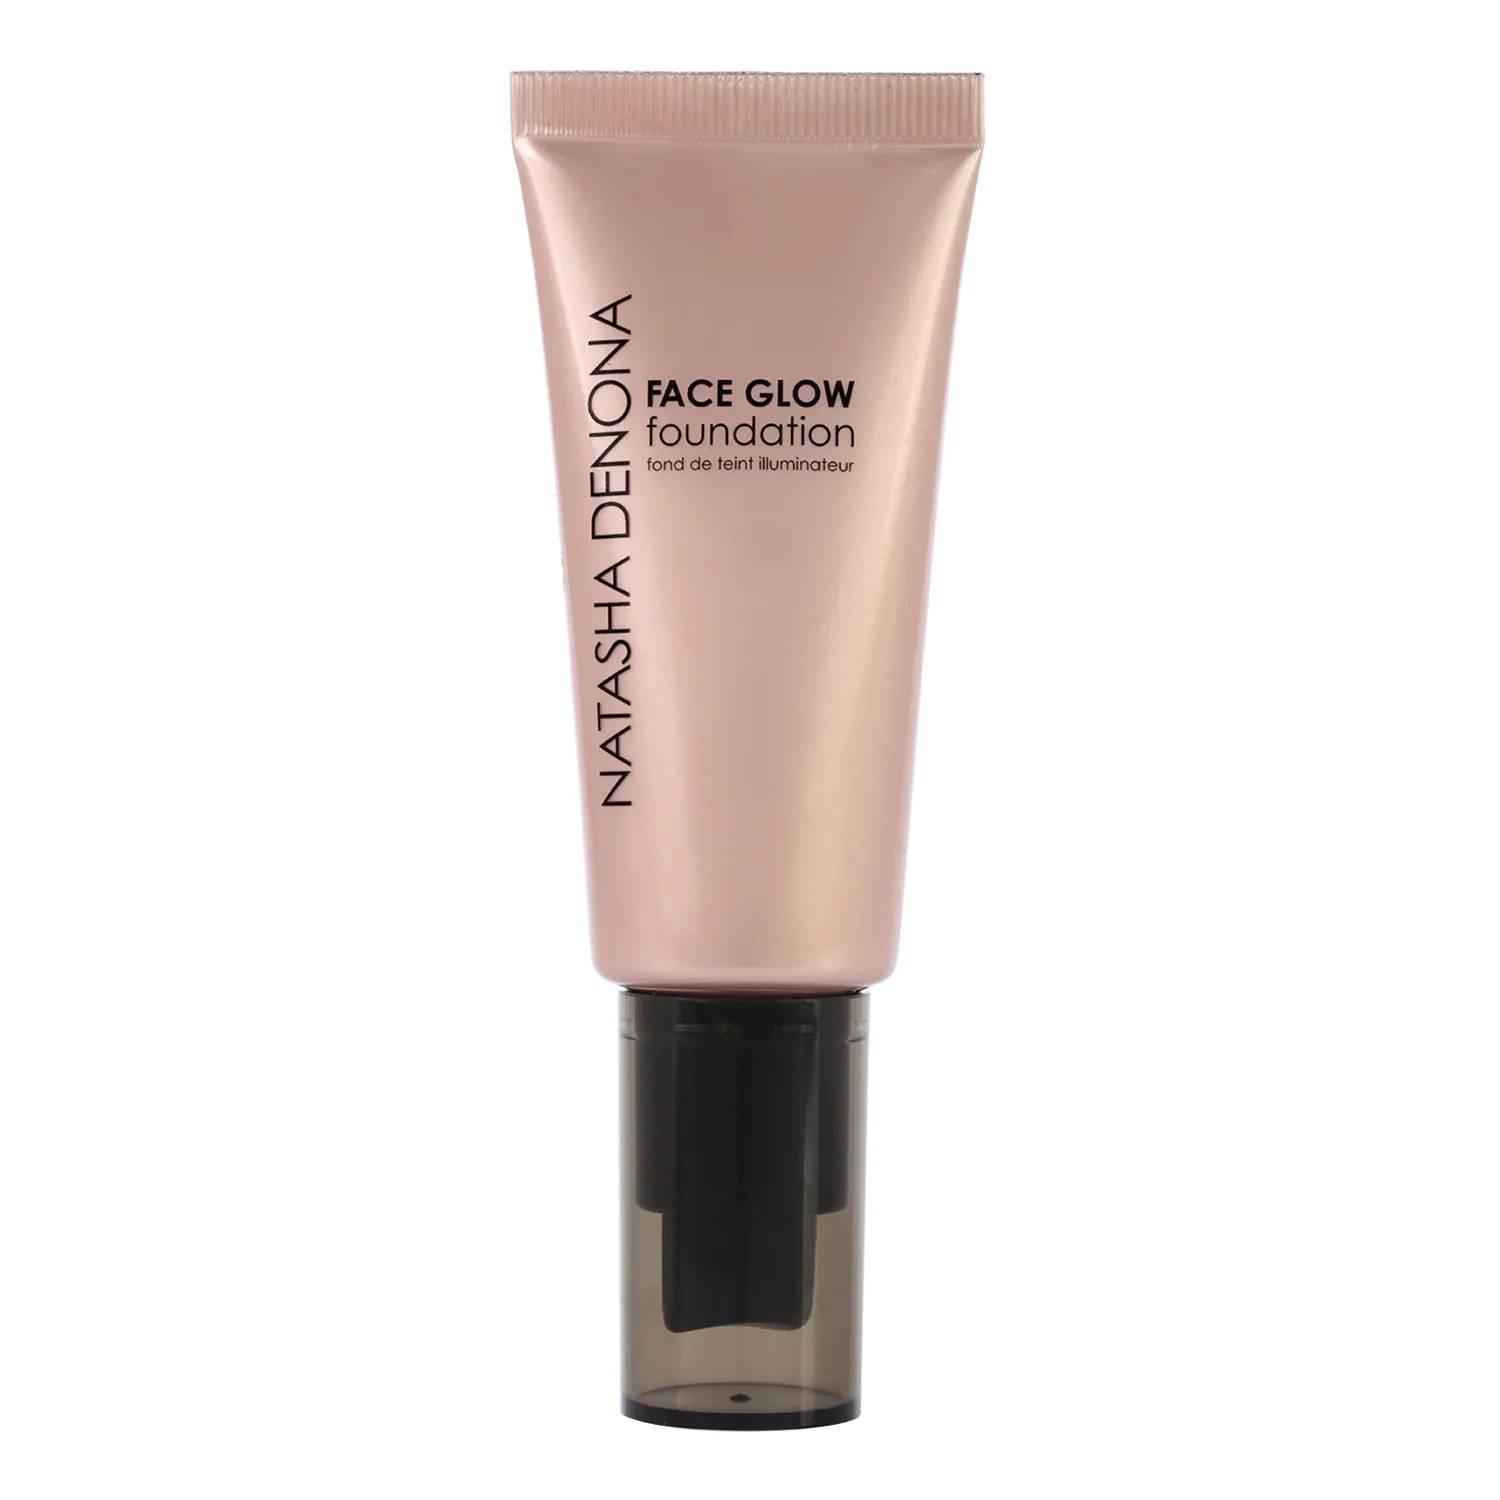 Face Glow Foundation